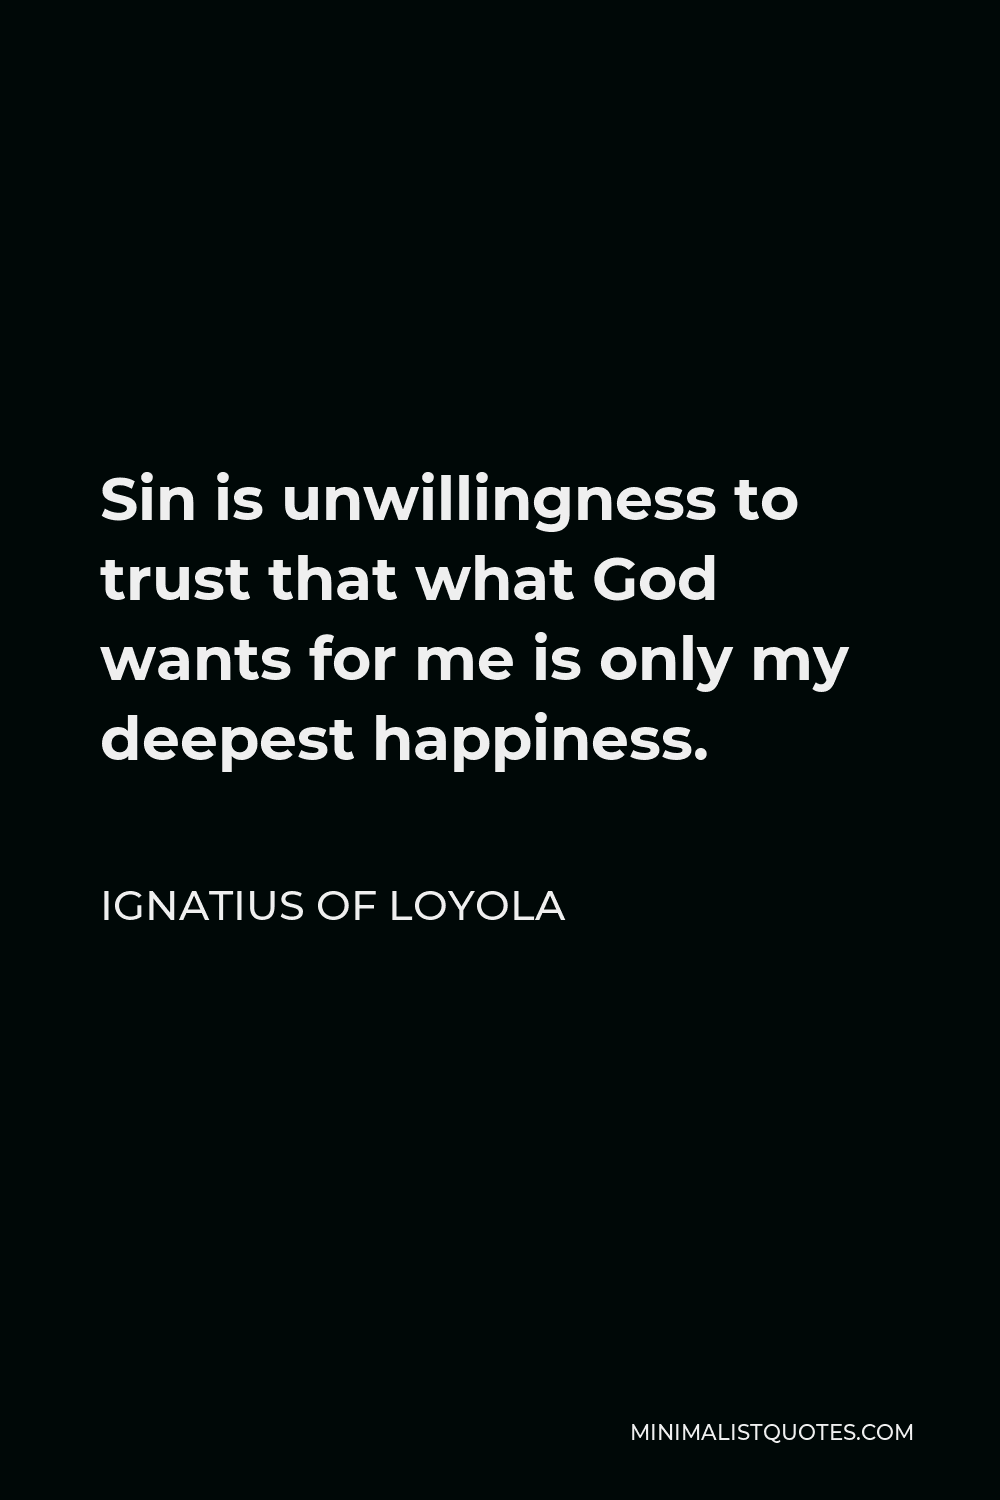 Ignatius of Loyola Quote - Sin is unwillingness to trust that what God wants for me is only my deepest happiness.